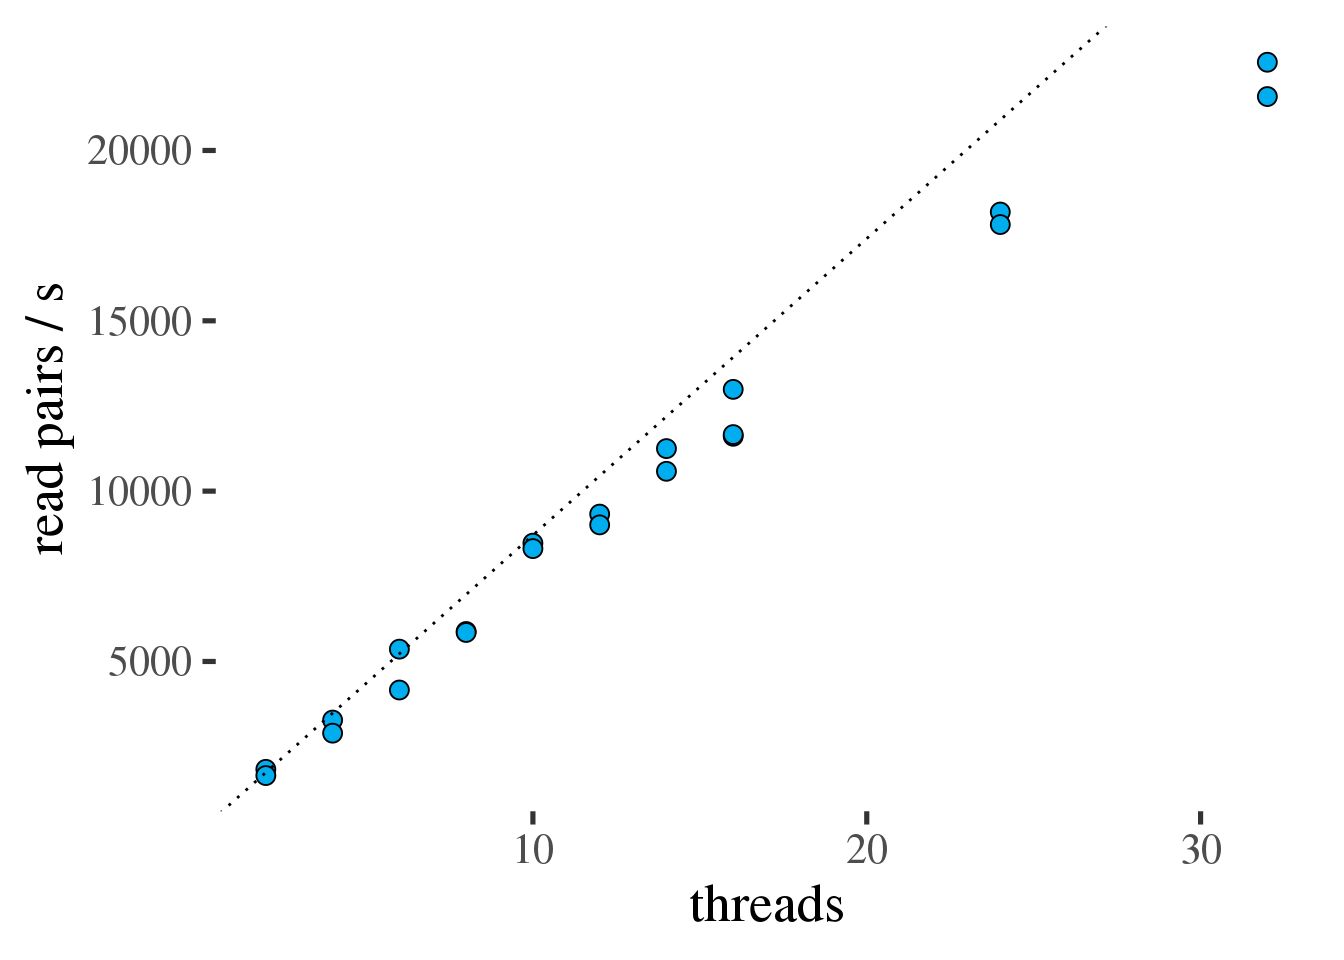 Throughput of bwa in read pairs per second as a function of the number of threads. Ideal scaling is shown as a dotted line.